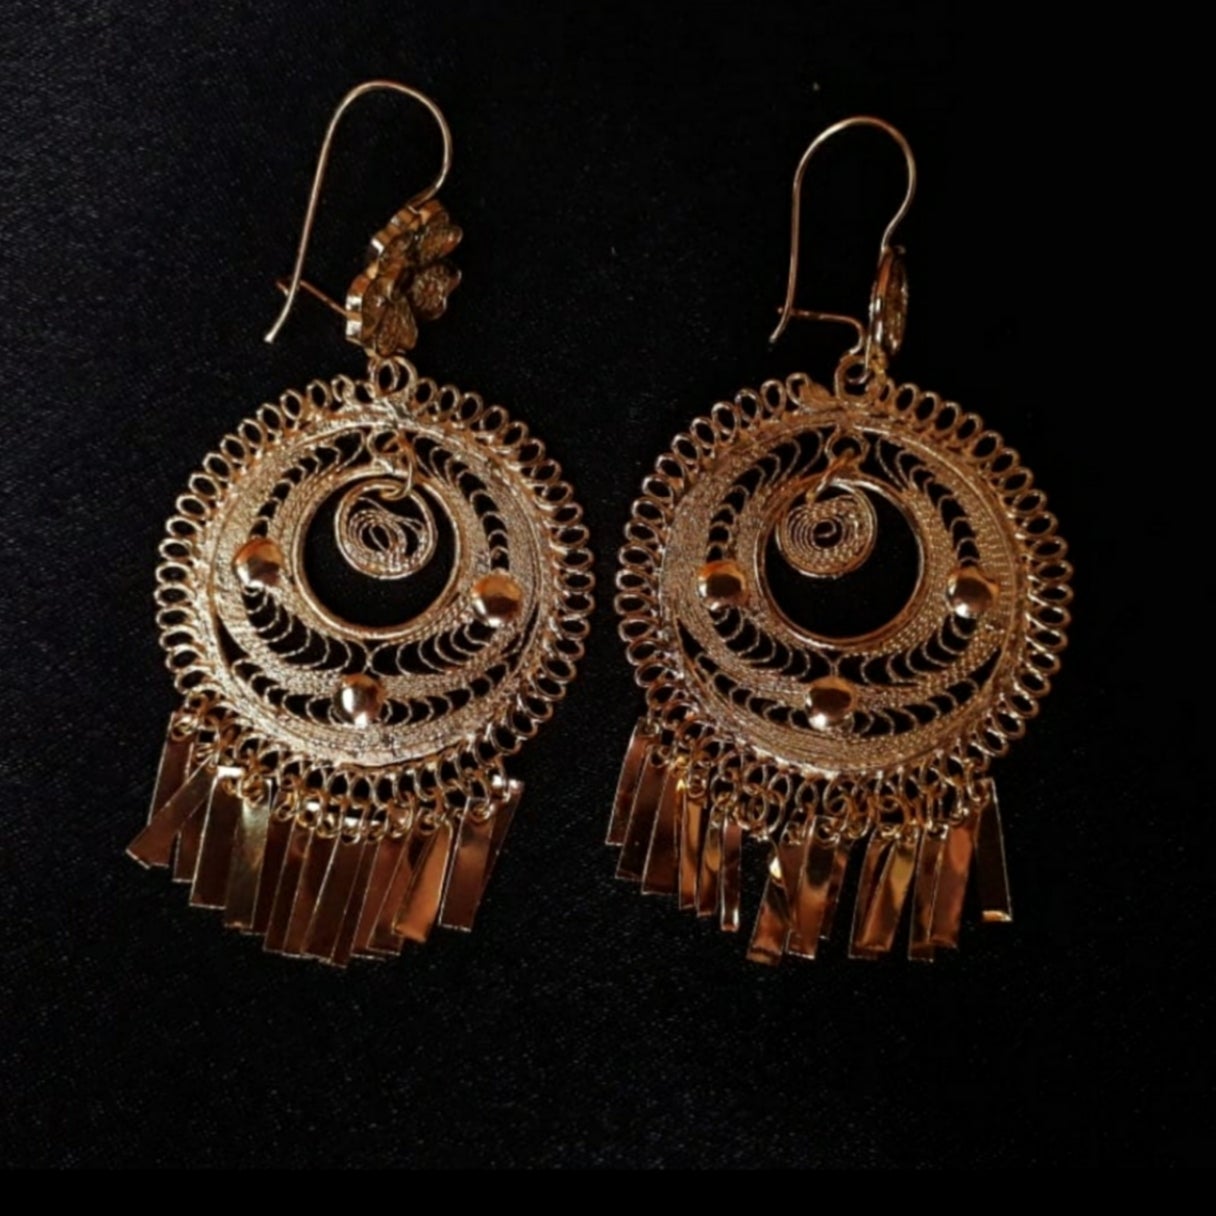 Mexican Filigree Earrings from Oaxaca - Frida Kahlo Image – JJ Caprices